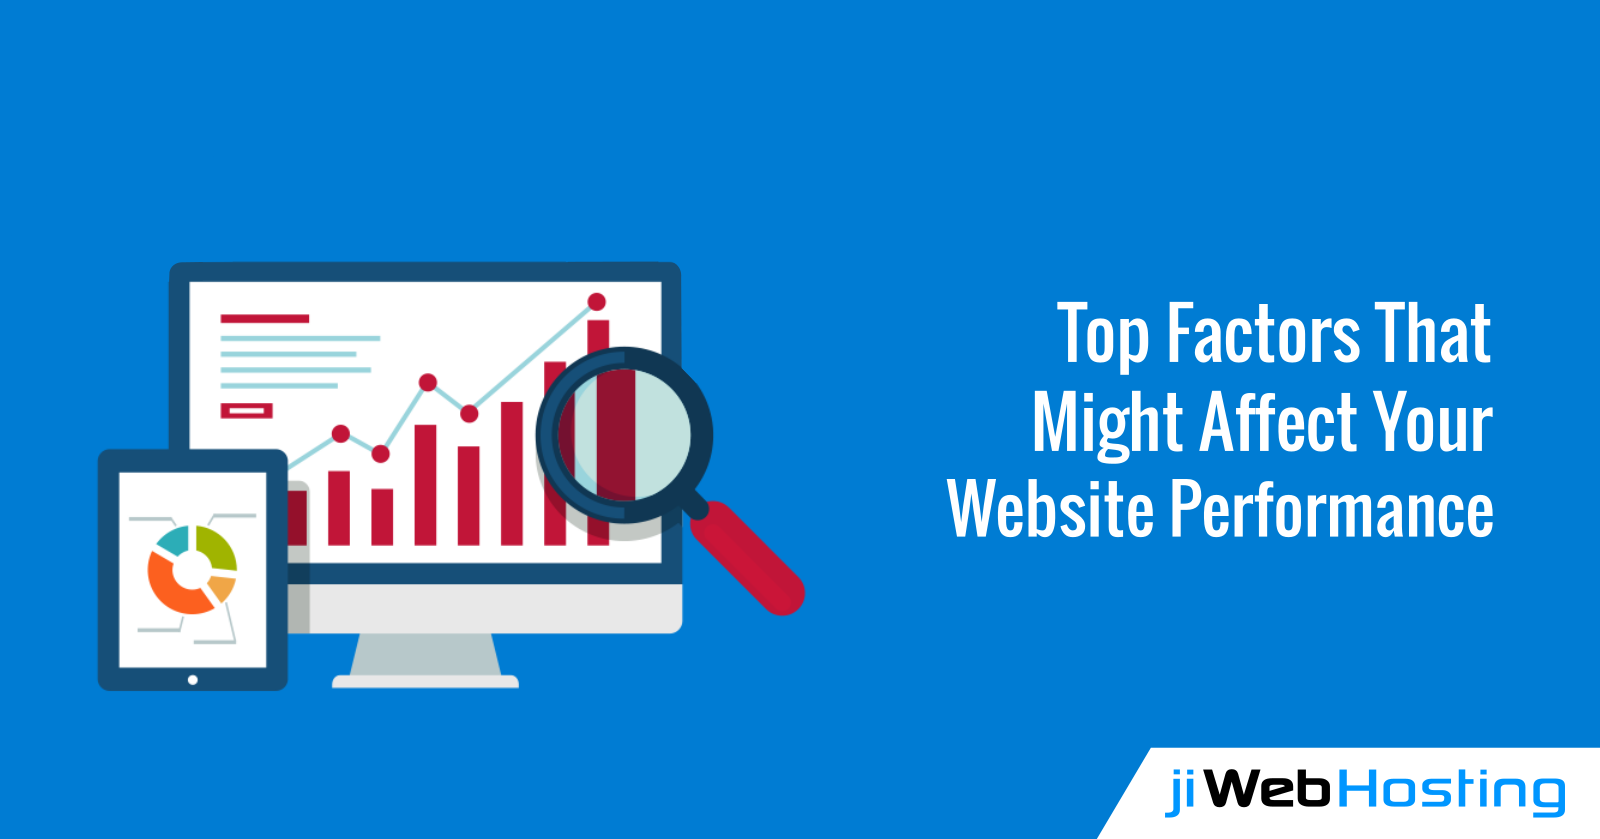 Top Factors That Might Affect Your Website Performance